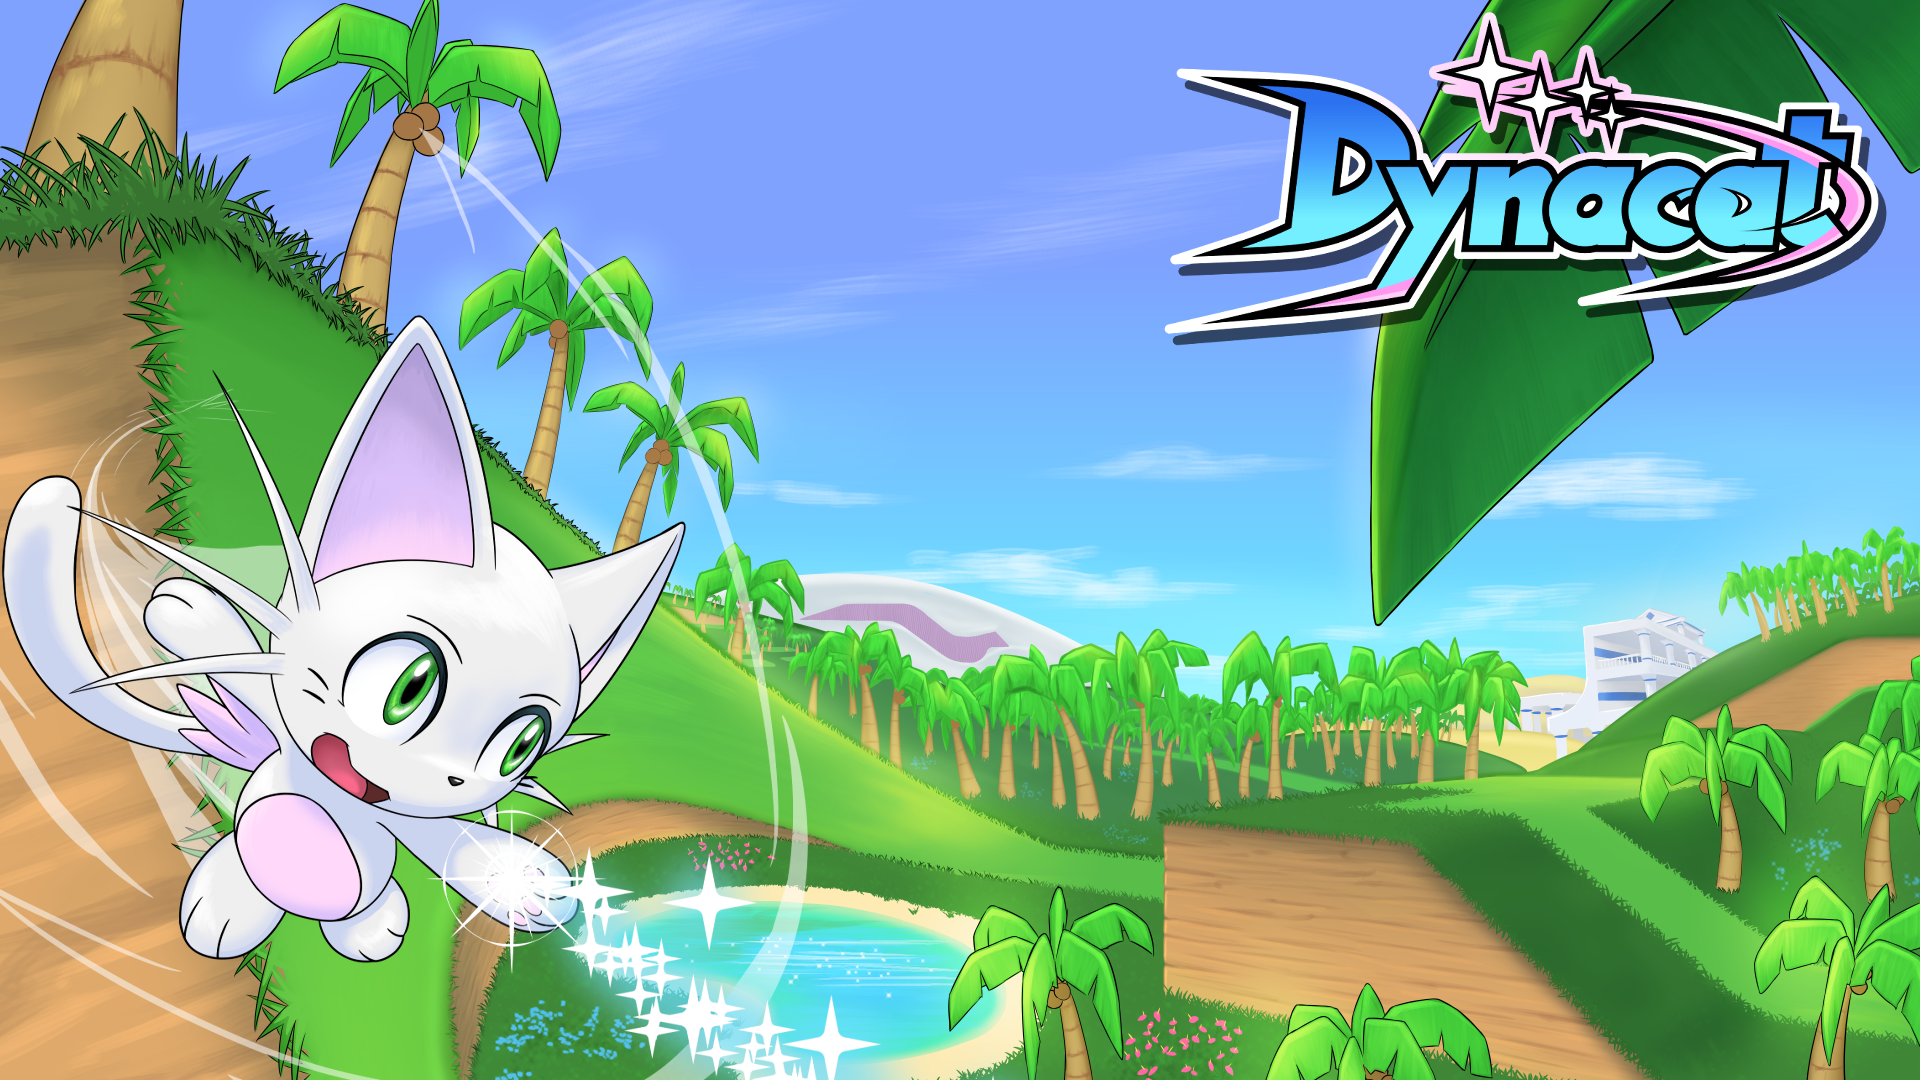 Promotional artwork for Dynacat